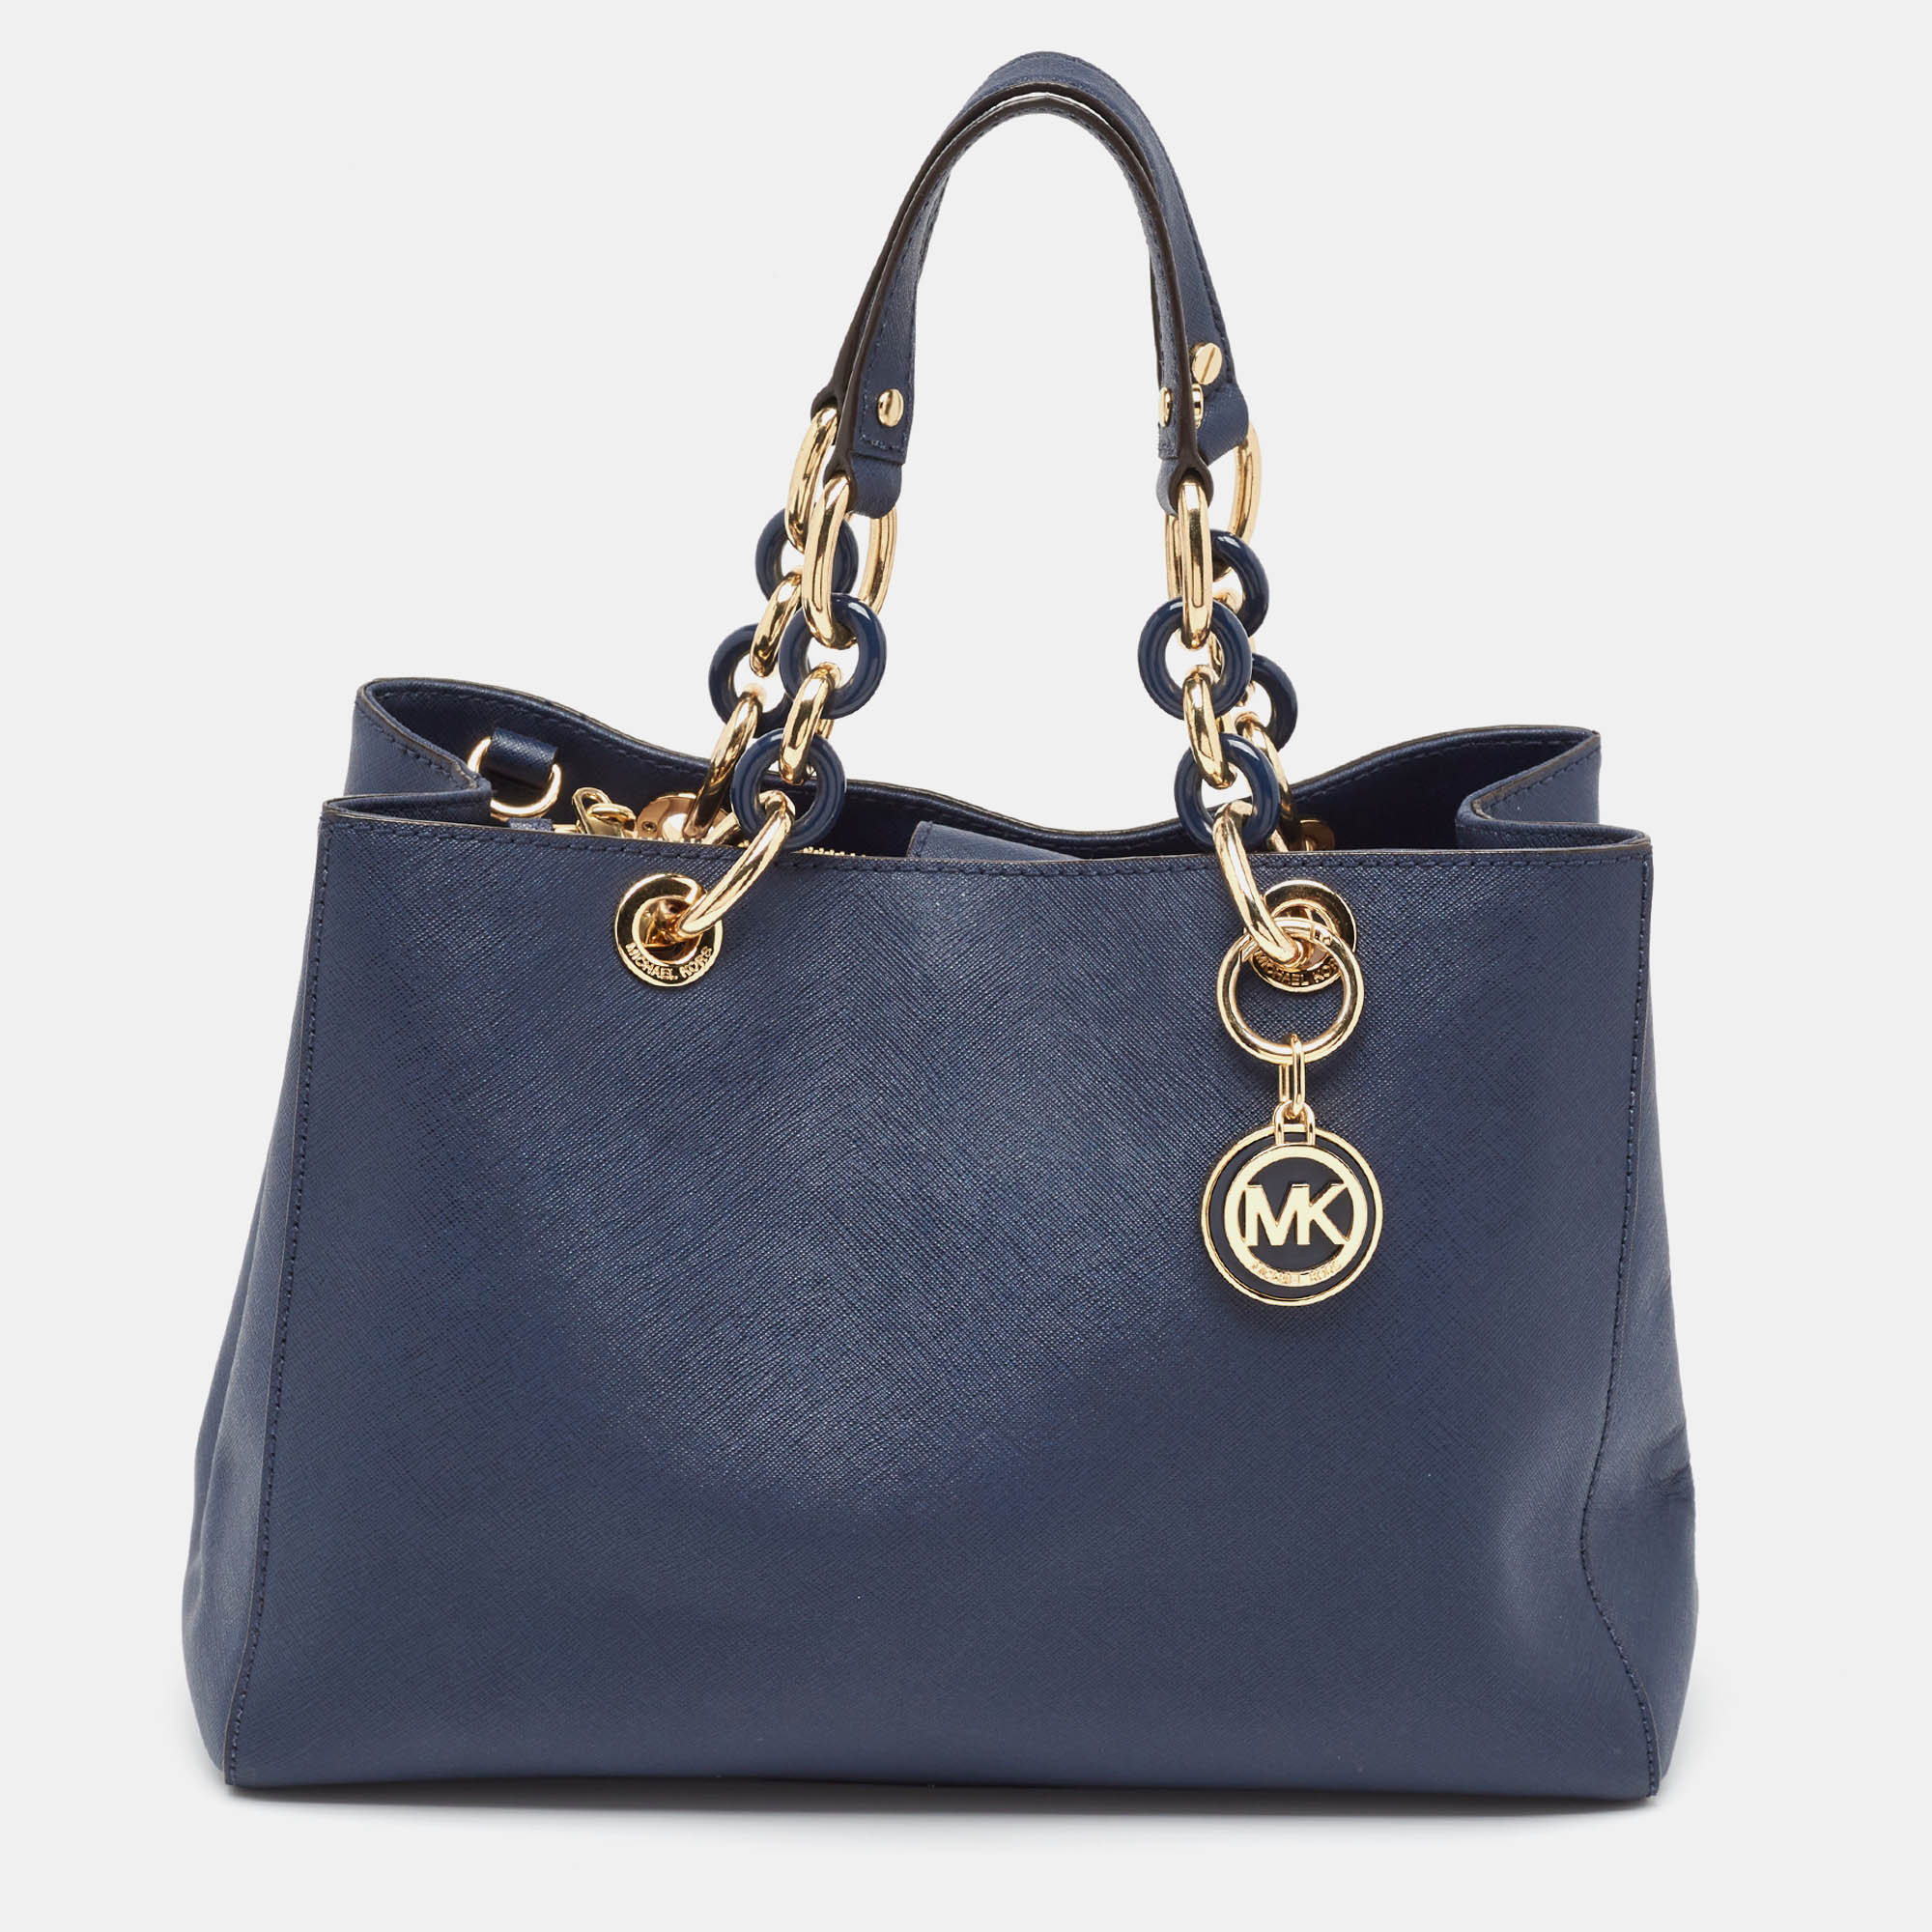 Pre-owned Michael Michael Kors Navy Blue Saffiano Leather Cynthia Tote